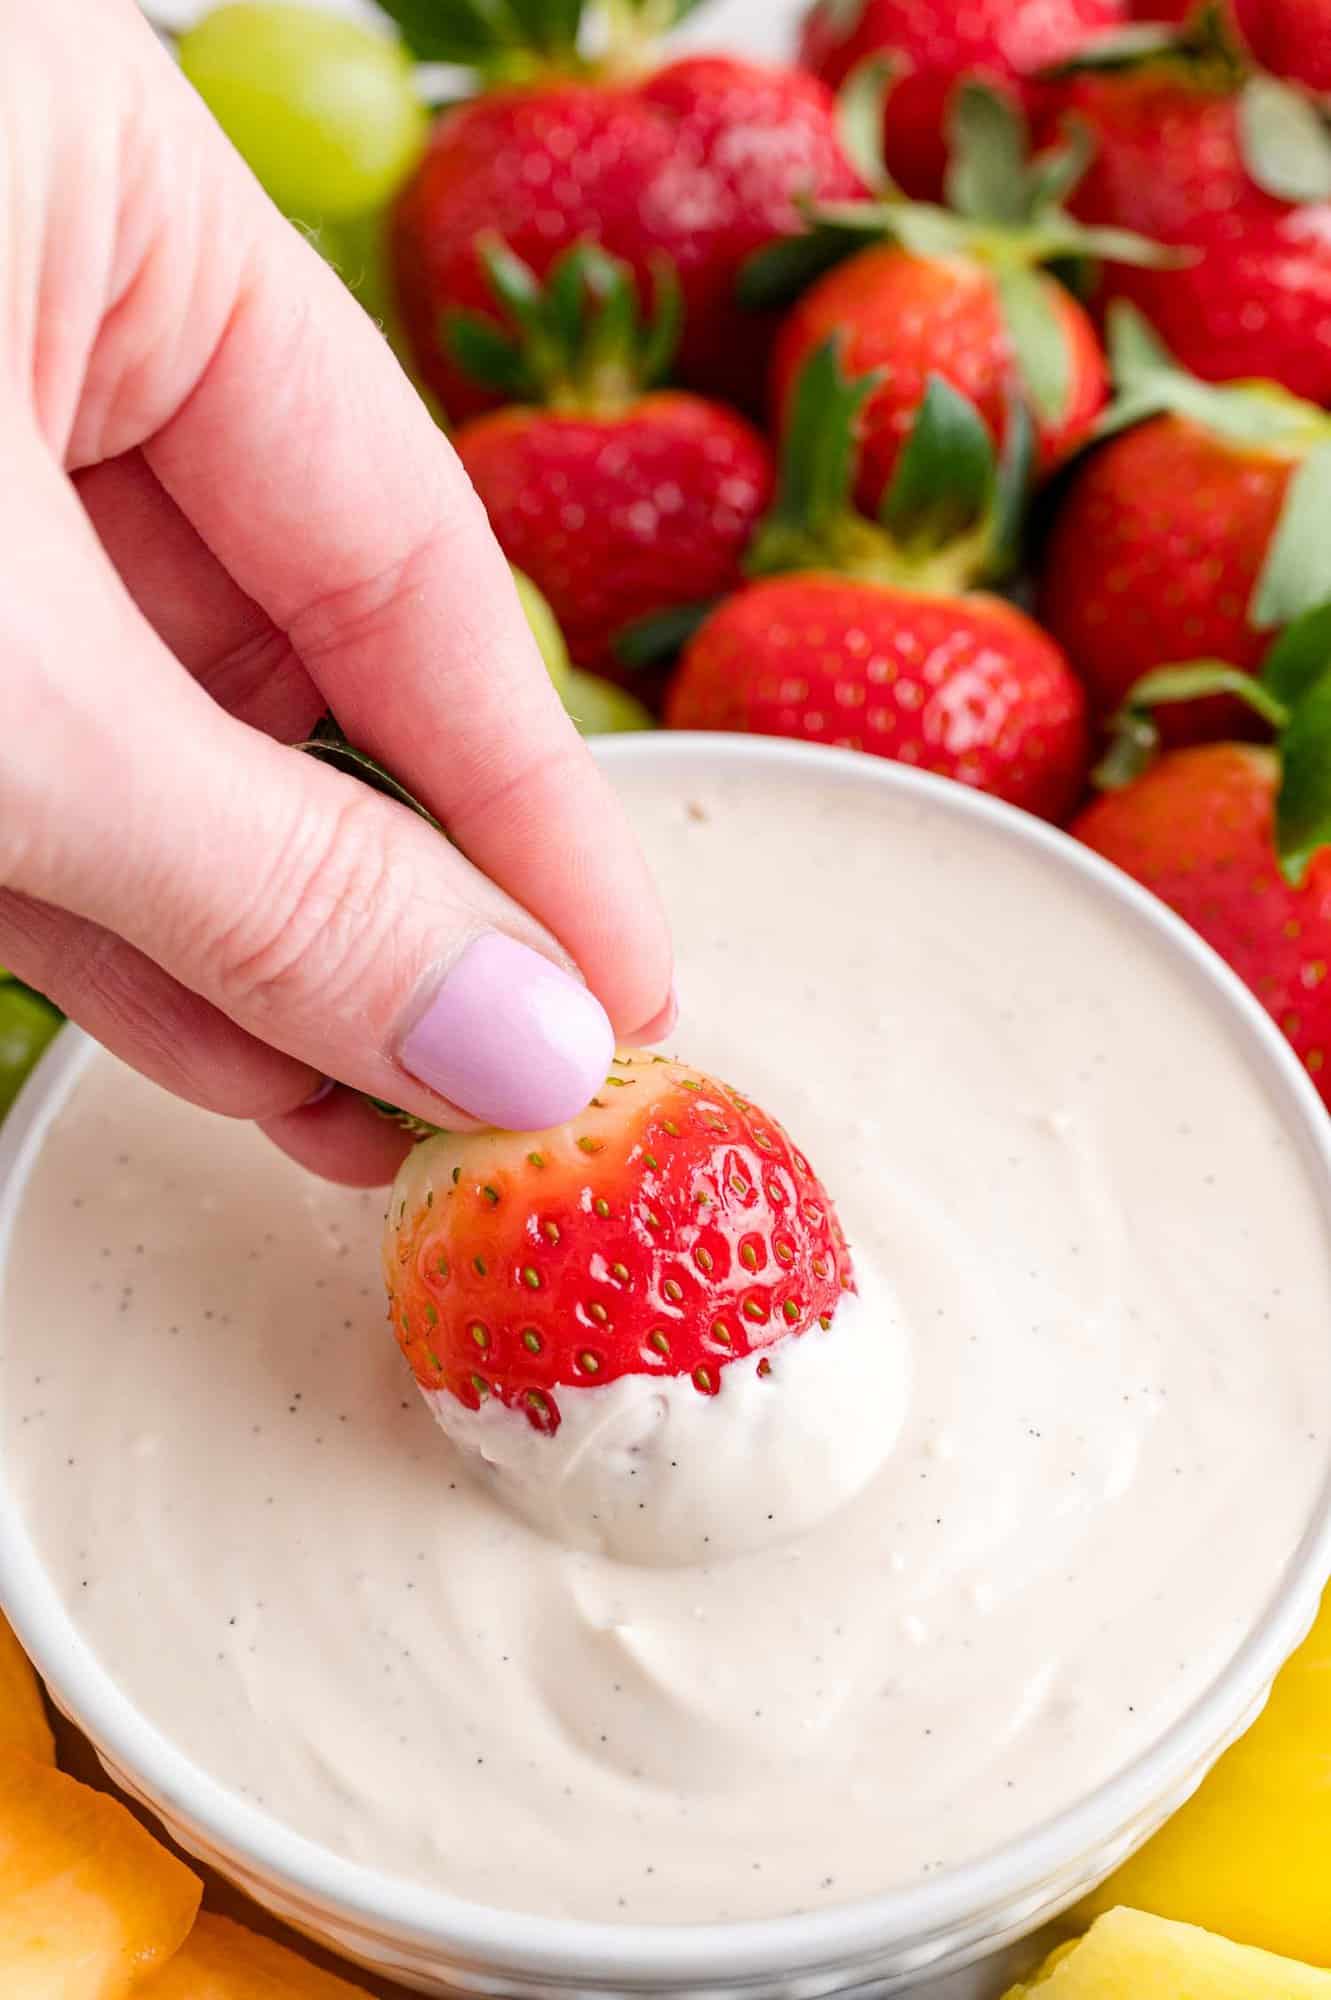 A hand dips a strawberry into a bowl of cream cheese fruit dip in the center of a fruit platter.